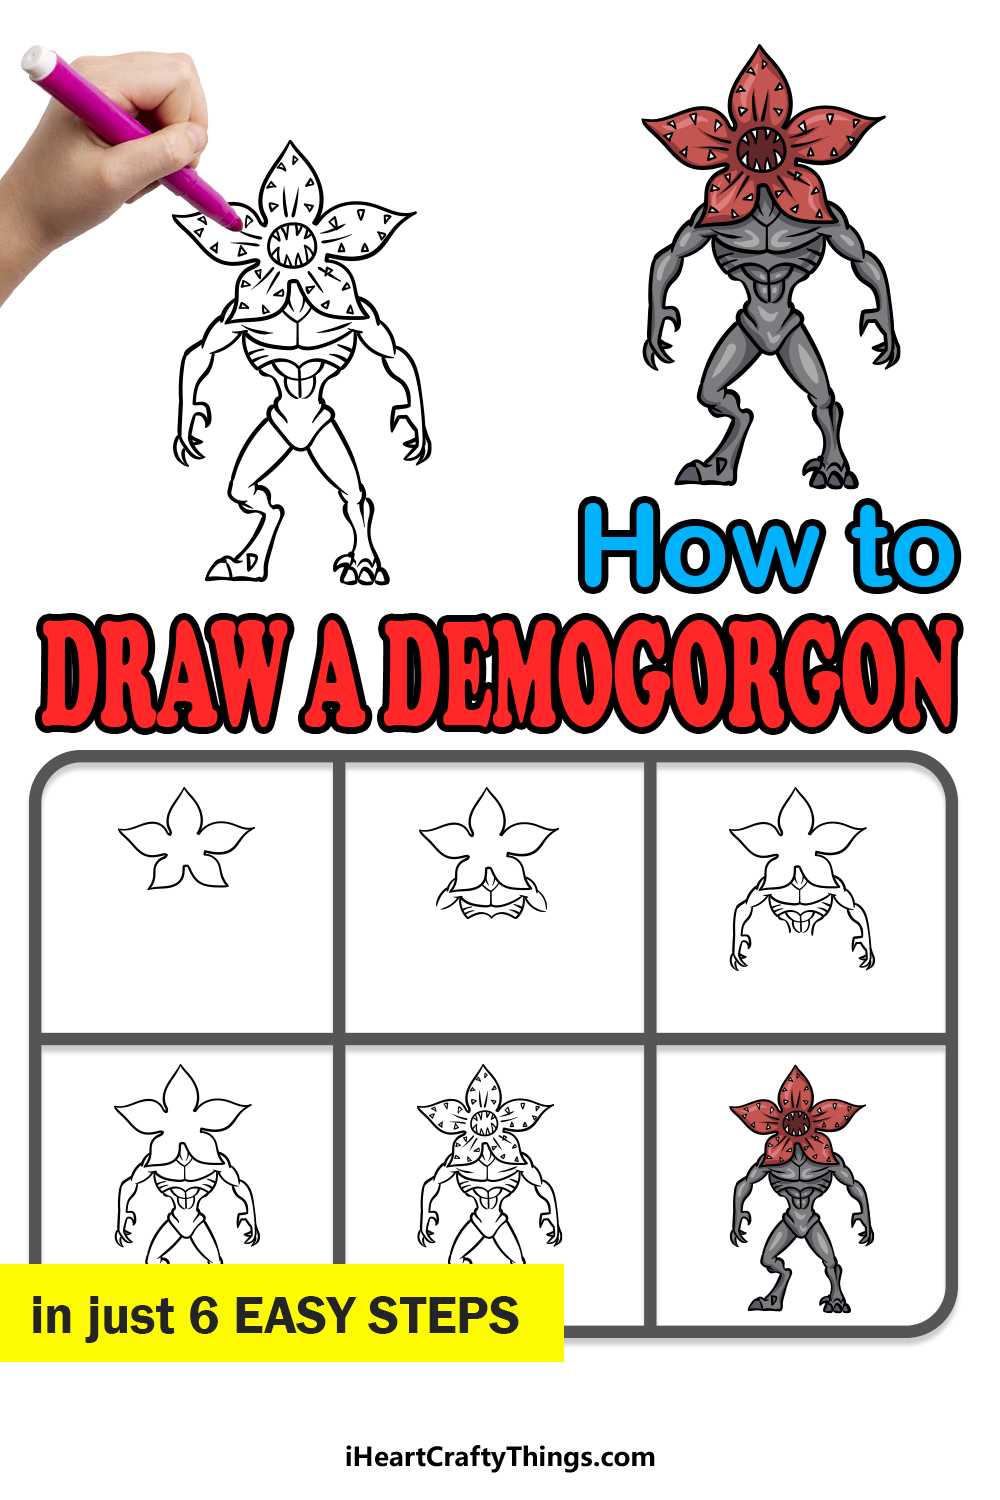 how to draw a Demogorgon in 6 easy steps